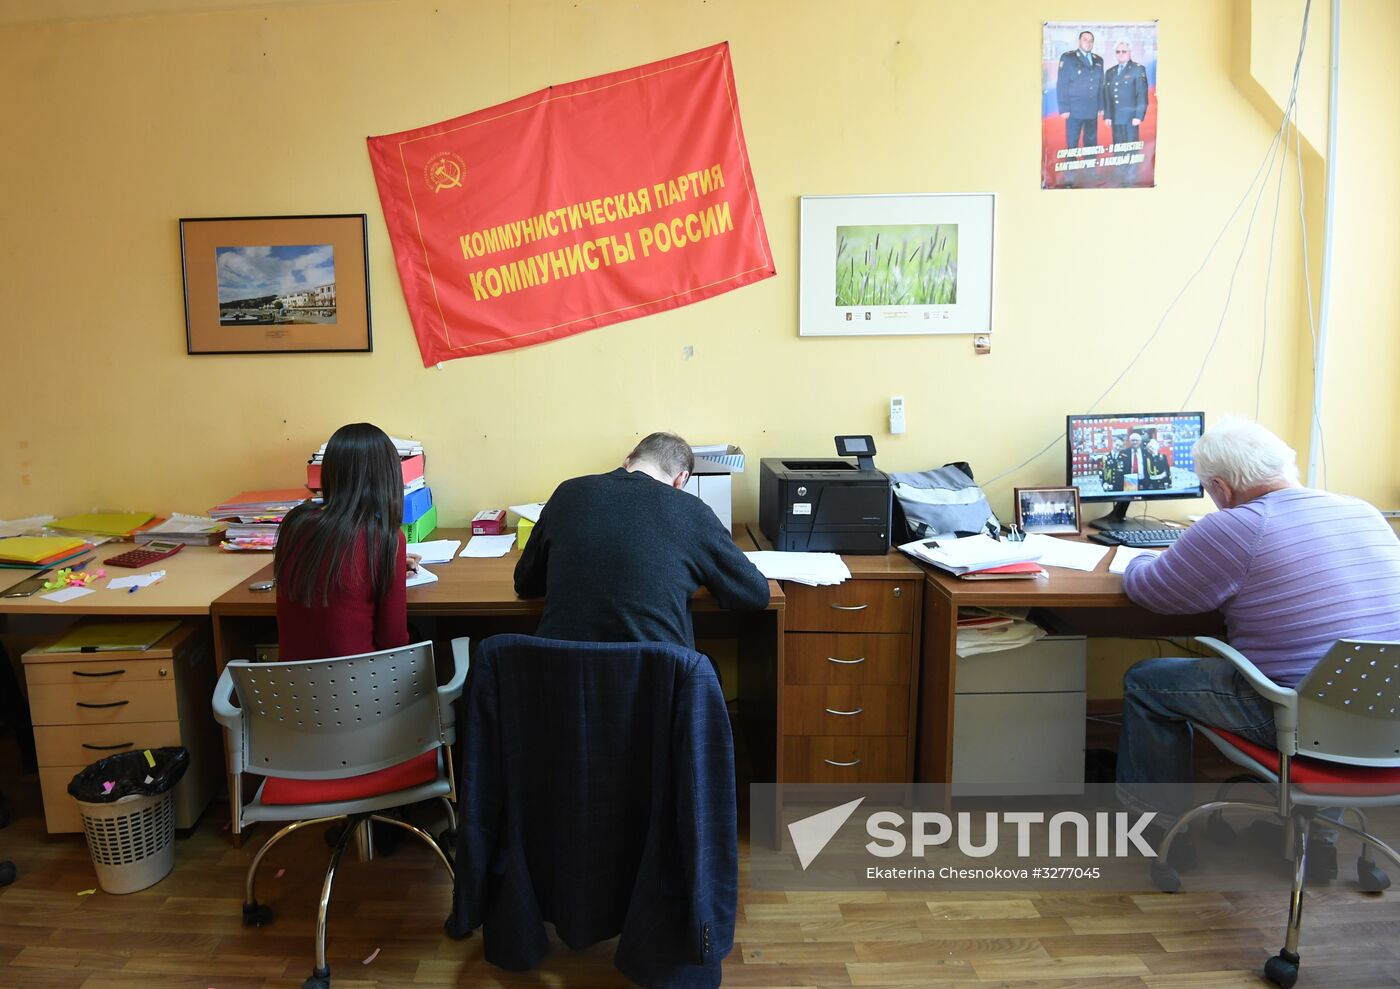 Election headquarters of presidential candidate Maxim Suraikin